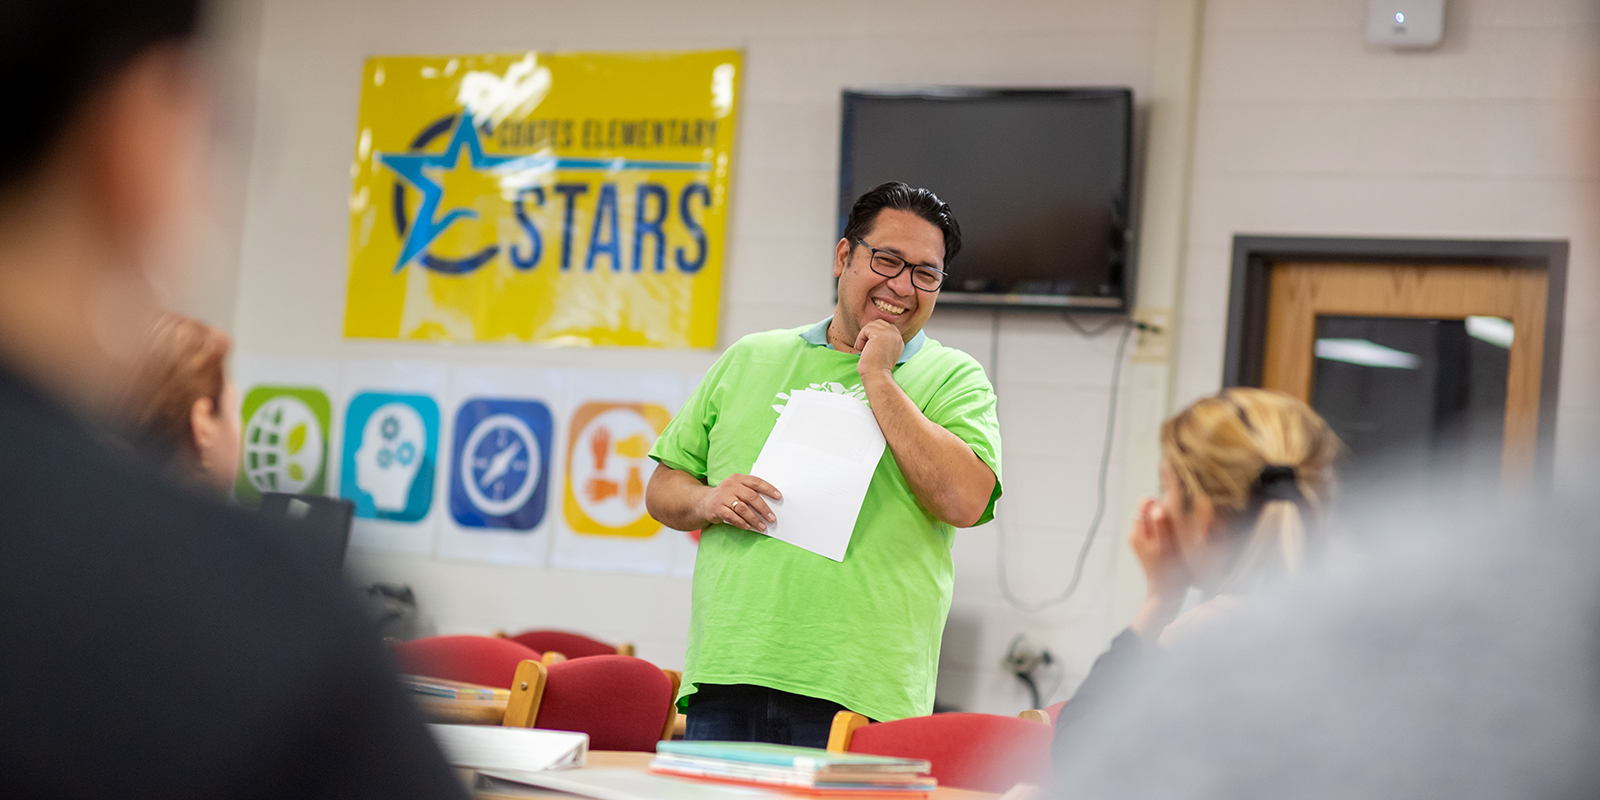 Edu-Futuro staff member Marcelo Ribera leads a Thursday night parenting resource workshop at Lutie Lewis Coates Elementary in Herndon.